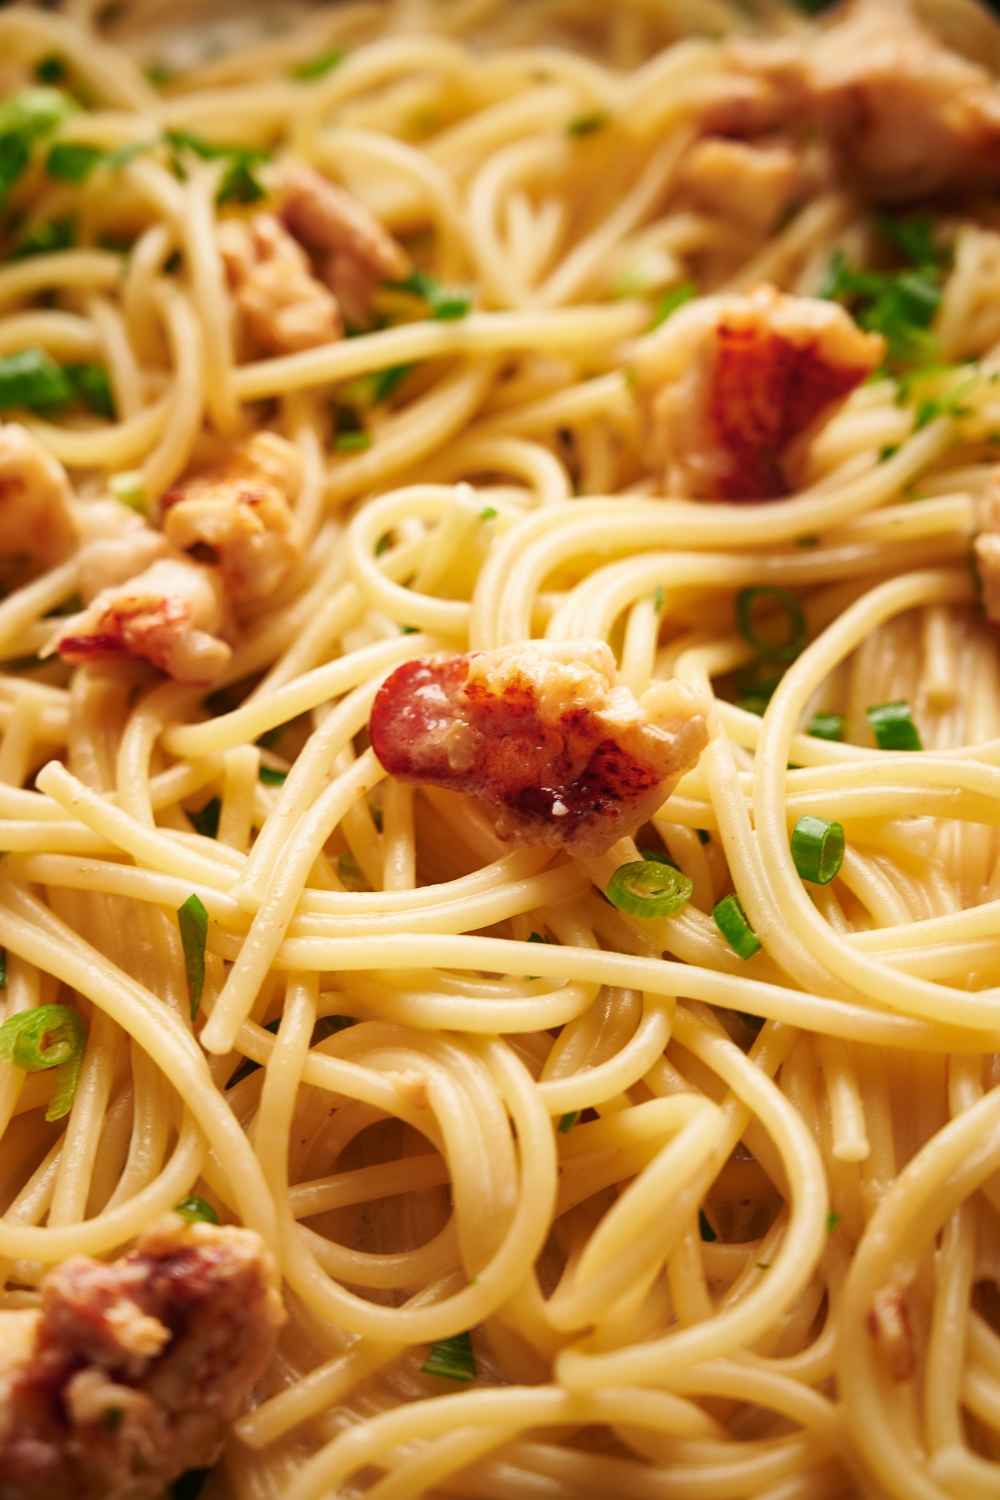 Cooked spaghetti mixed with lobster meat, green onion, and fresh herbs.